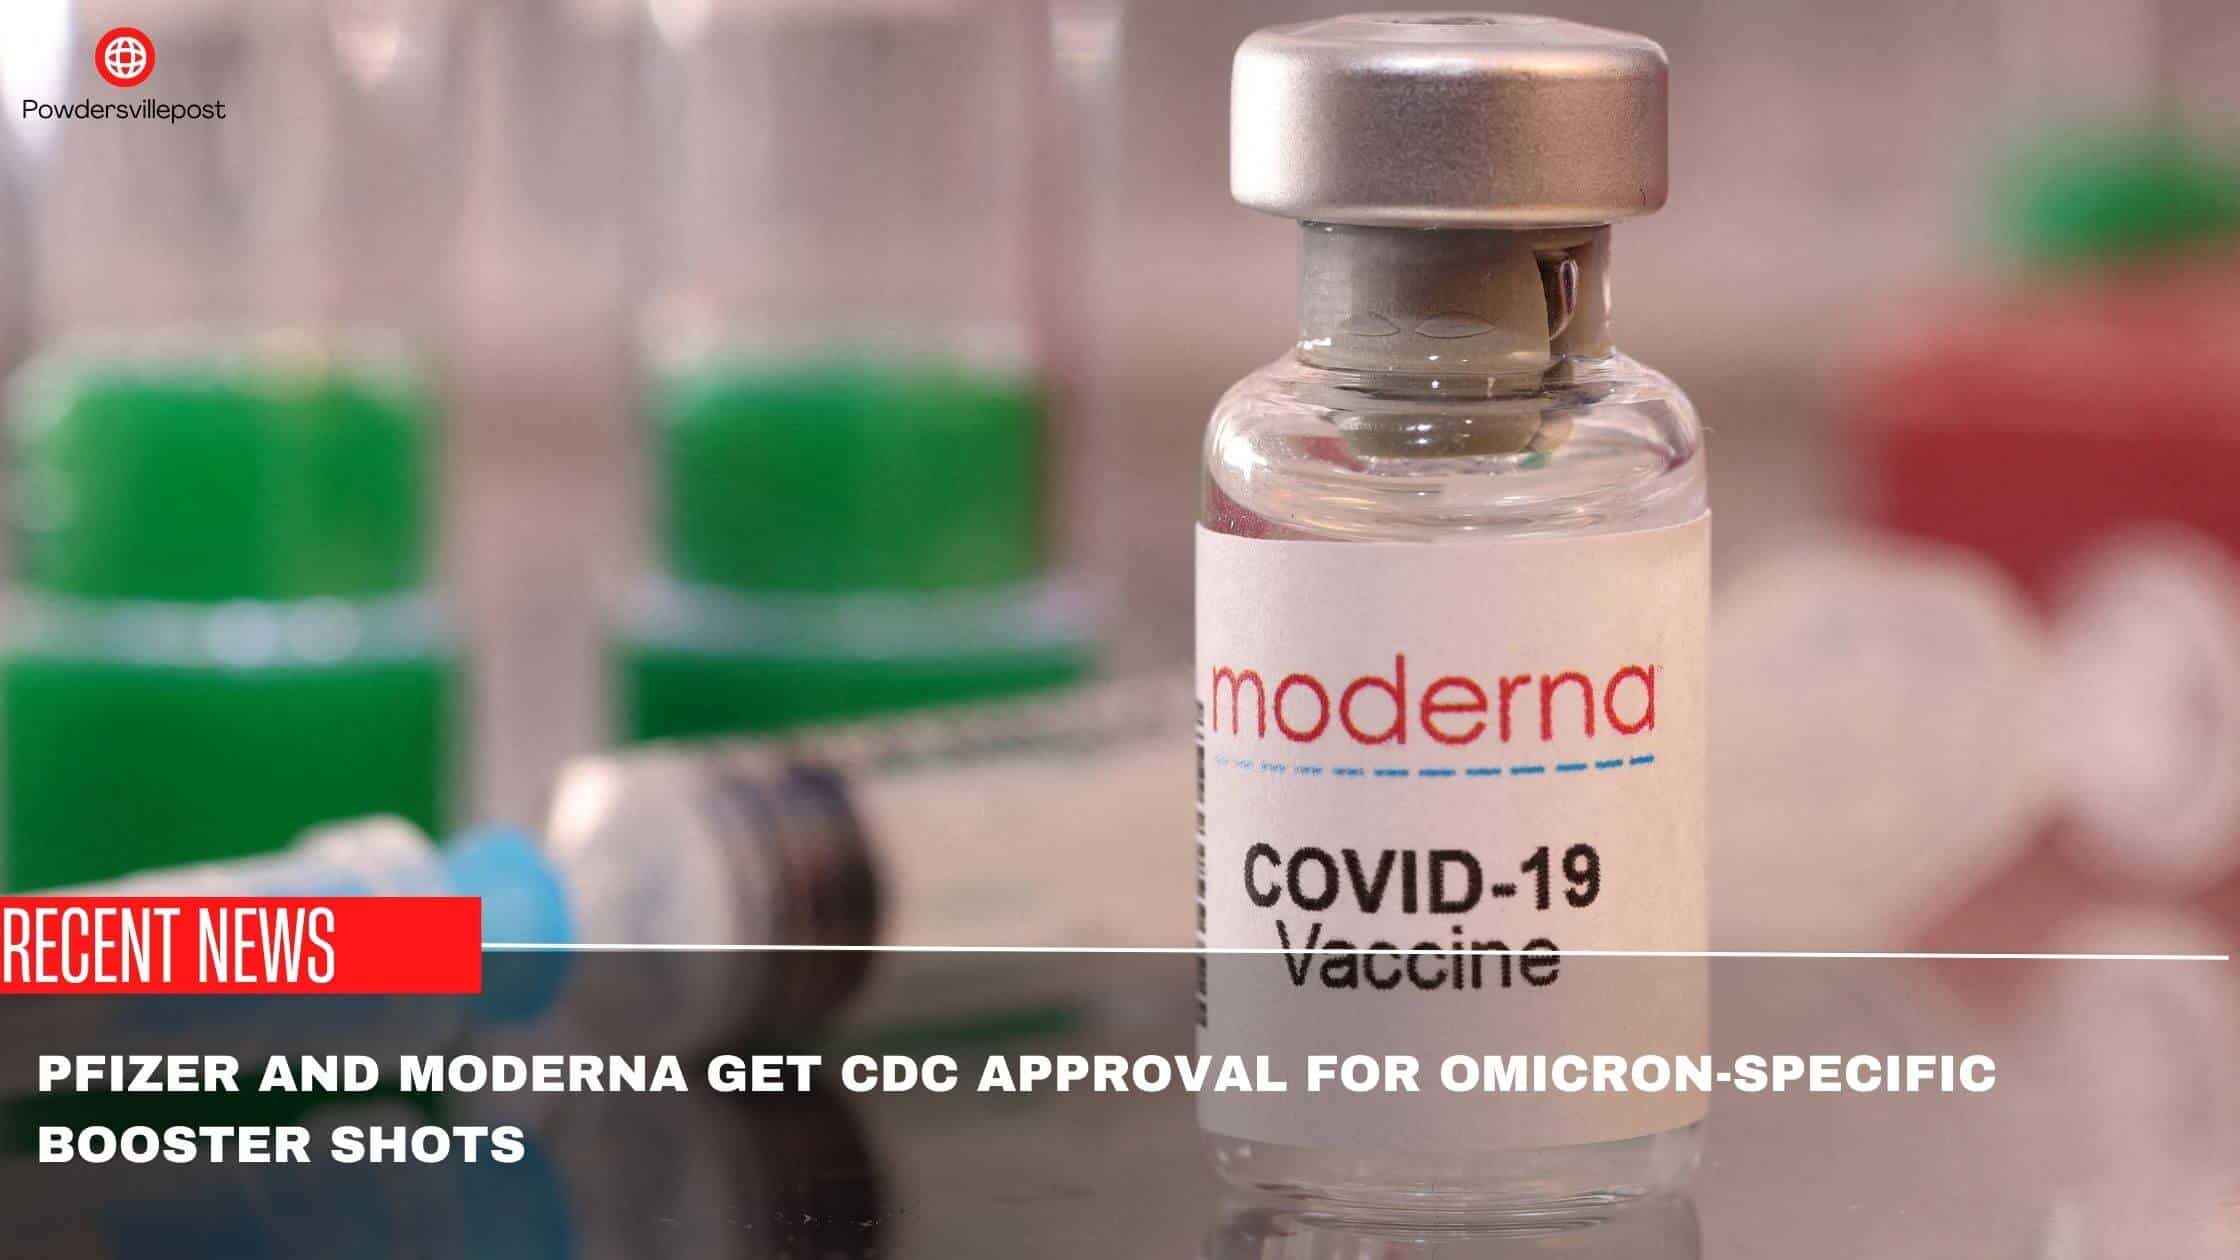 Pfizer And Moderna Get CDC Approval For Omicron-Specific Booster Shots